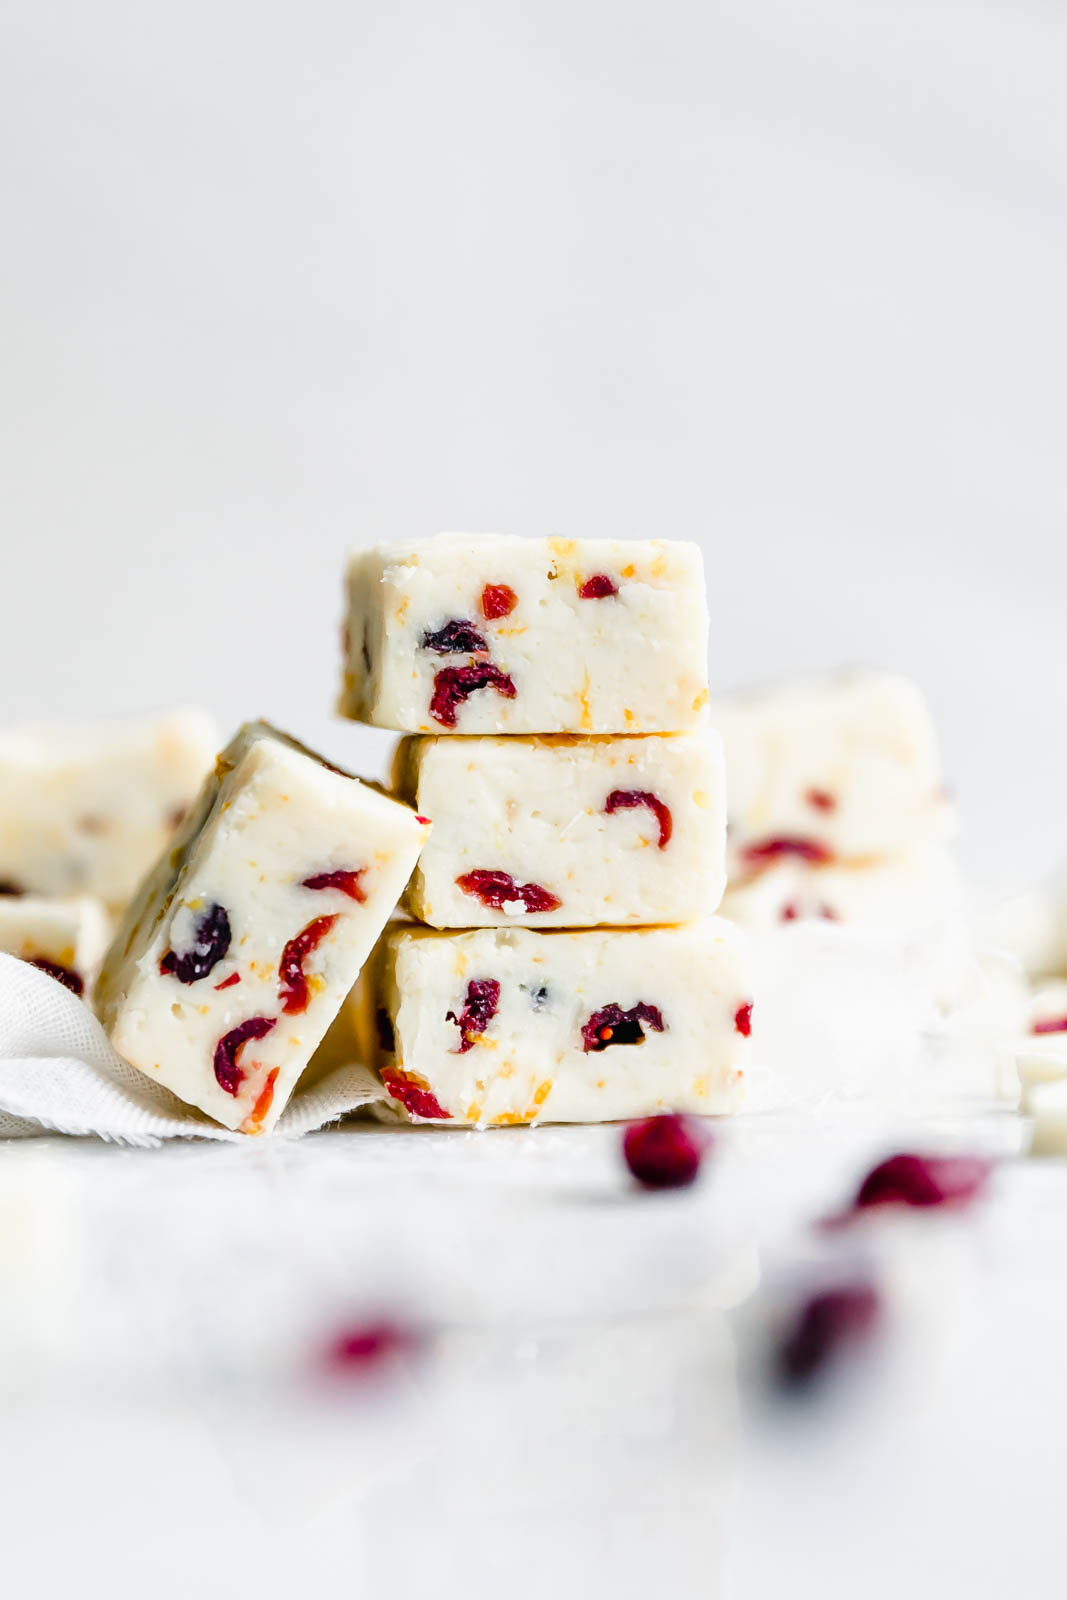 This 4-ingredient Cranberry Orange White Chocolate Fudge is a quick and delicious holiday treat the whole family will love!